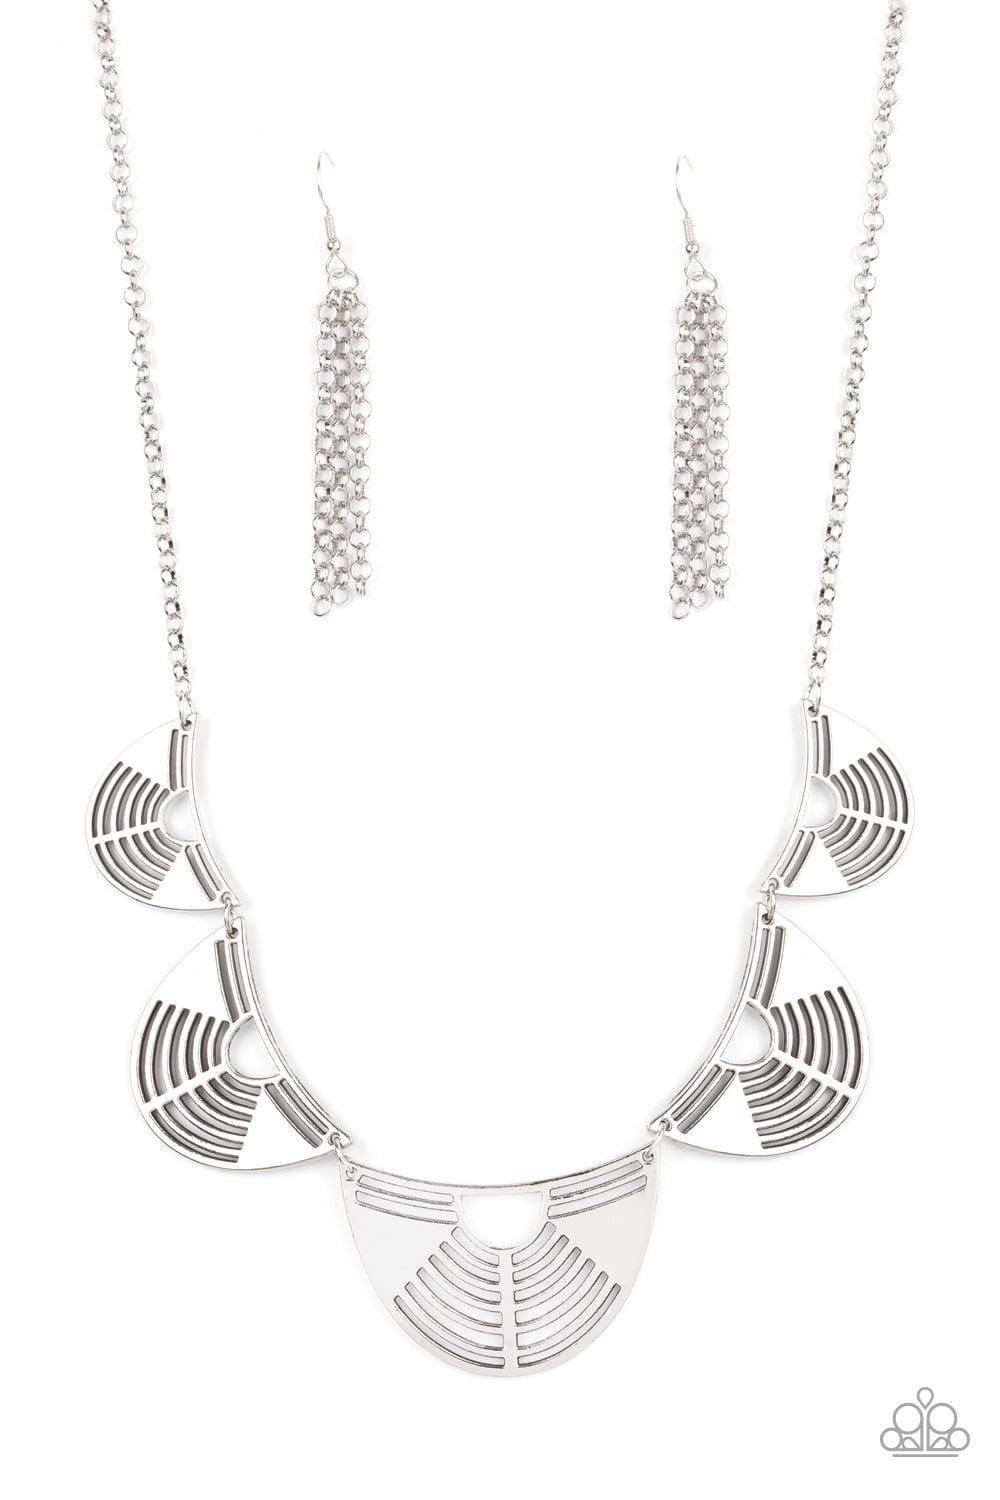 Paparazzi Accessories - Record-breaking Radiance - Silver Necklace - Bling by JessieK